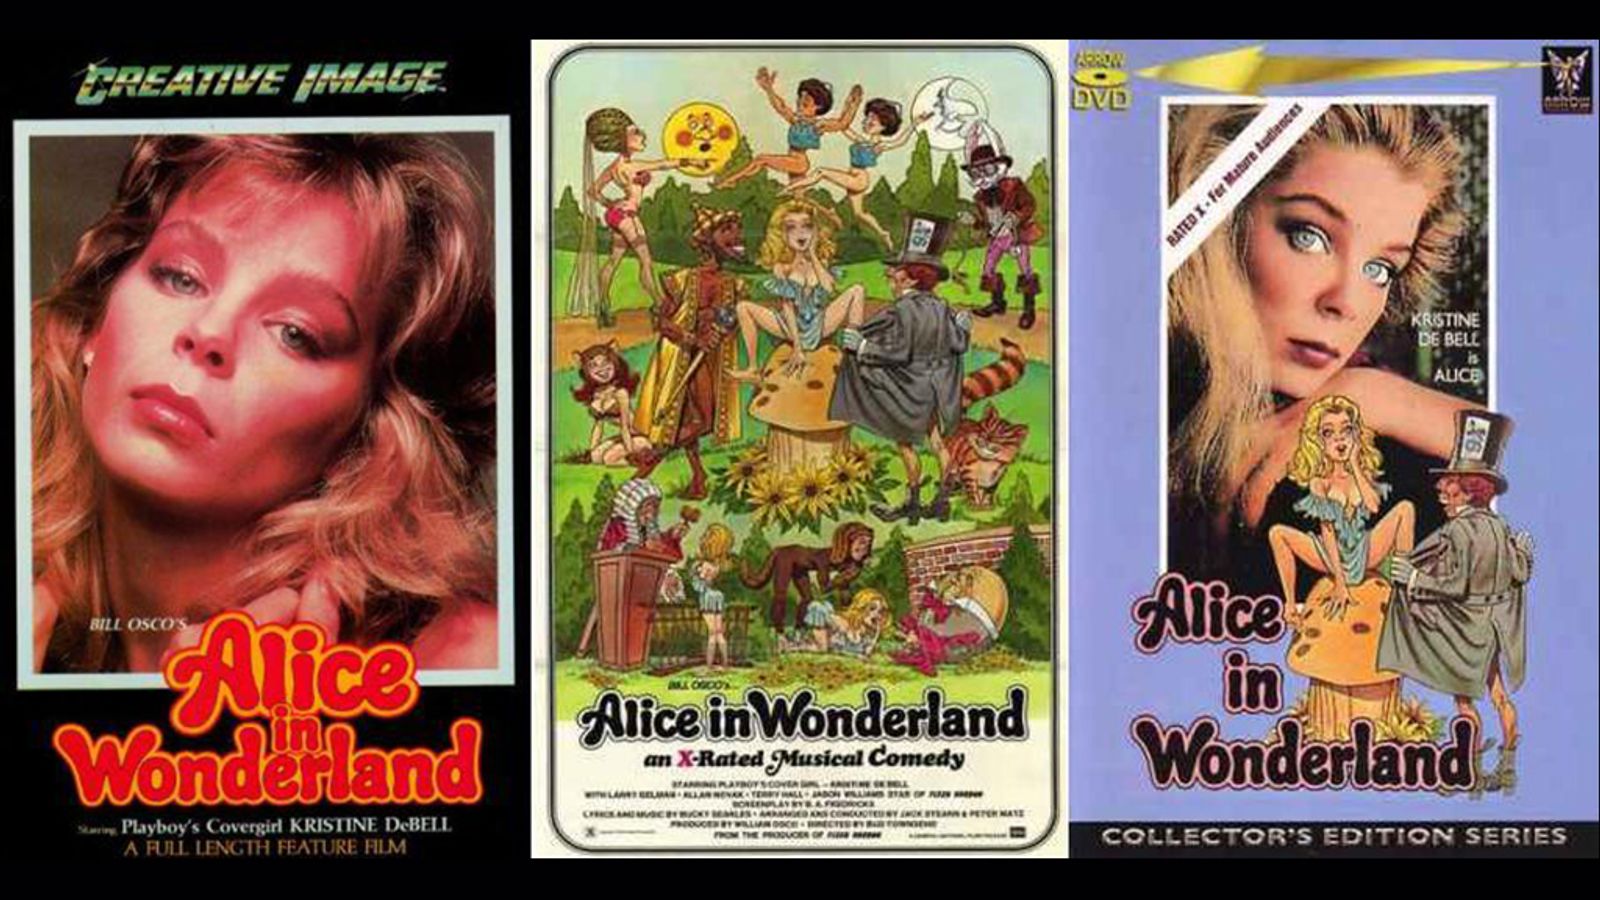 Cinefamily To Show X-Rated 'Alice In Wonderland' Midnight June 24